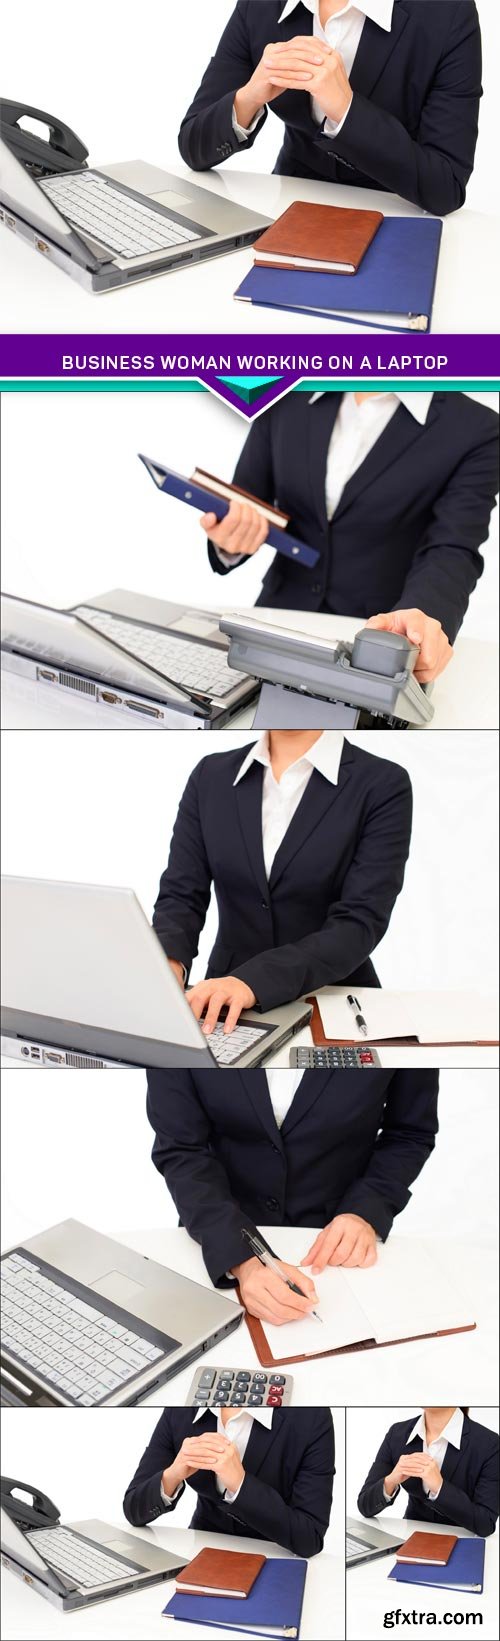 Business woman working on a laptop 5x JPEG